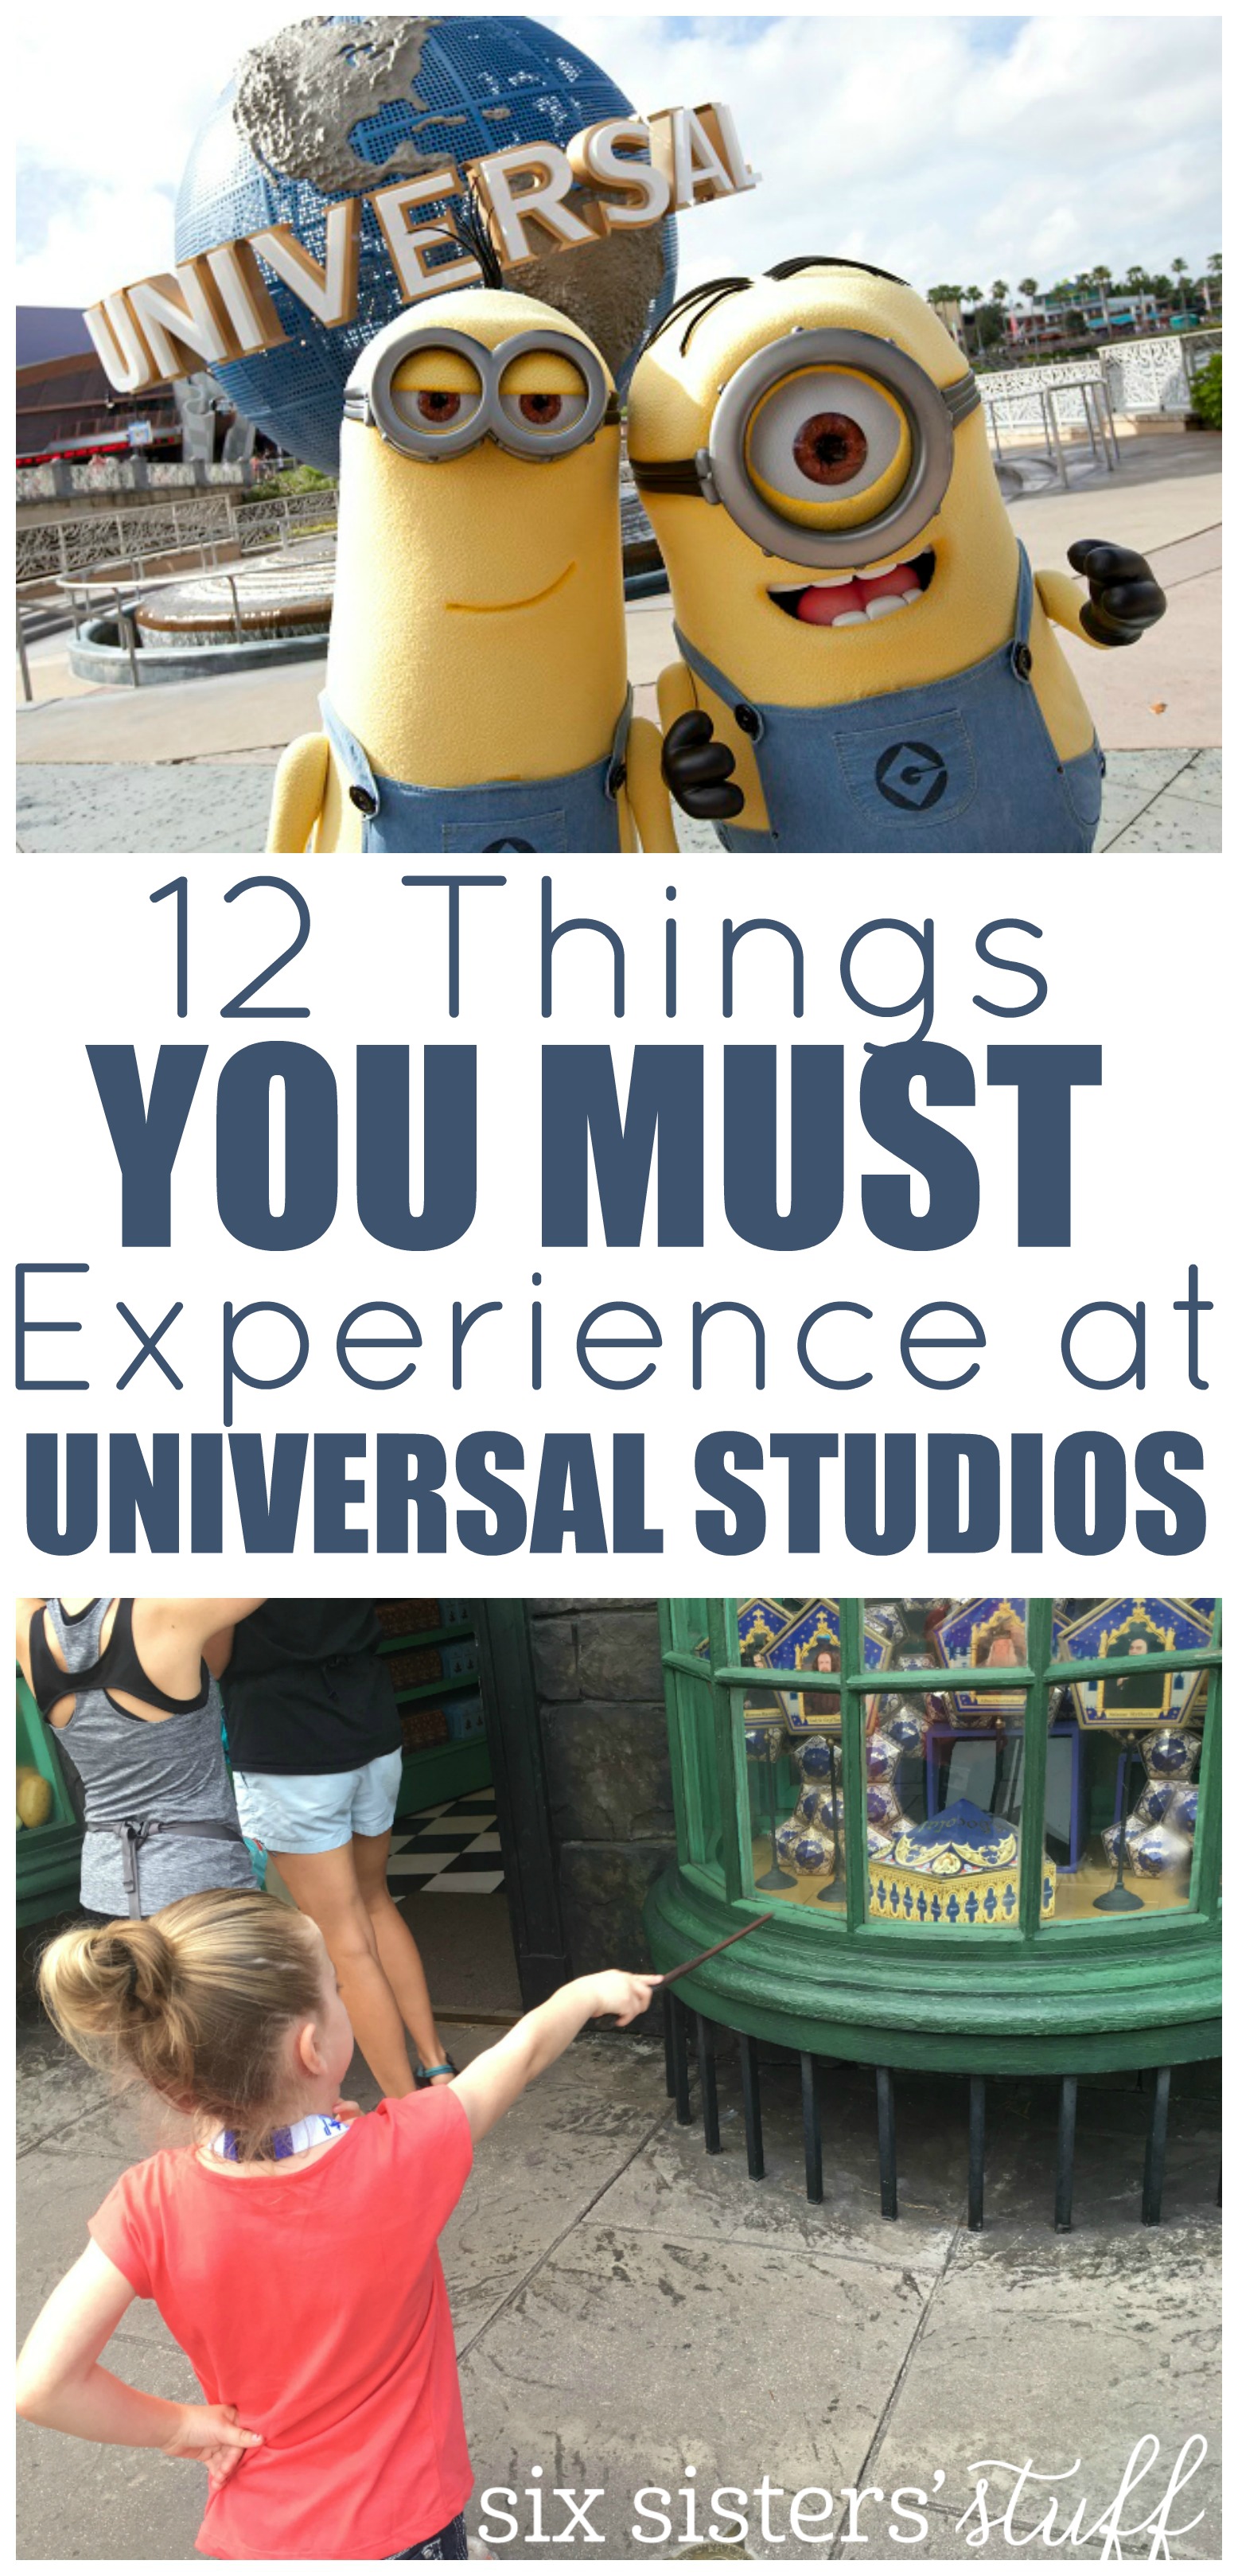 12 Things You Must Experience at Universal Studios